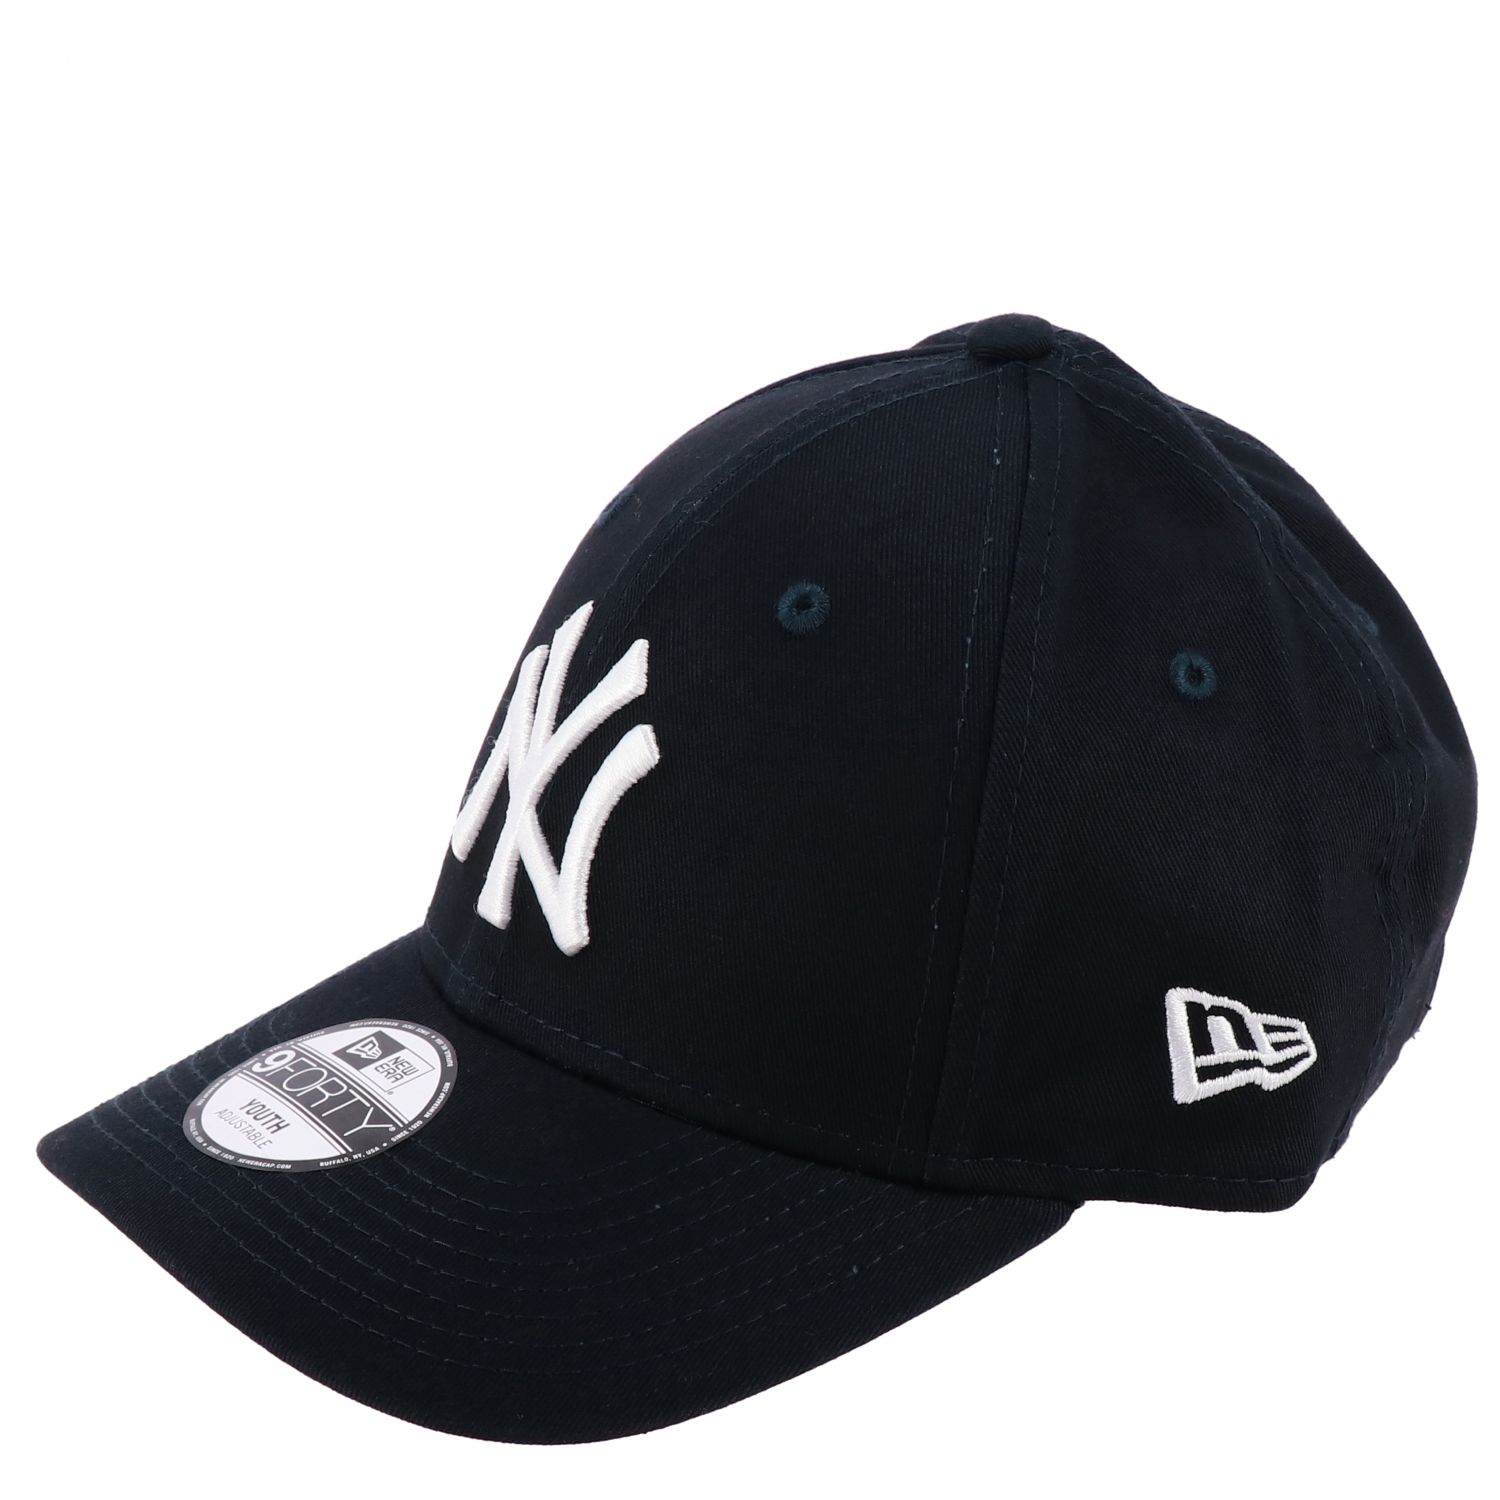 New Era Youth Outlet: hat for kids - Blue | New Era Youth hat 10877283 ...